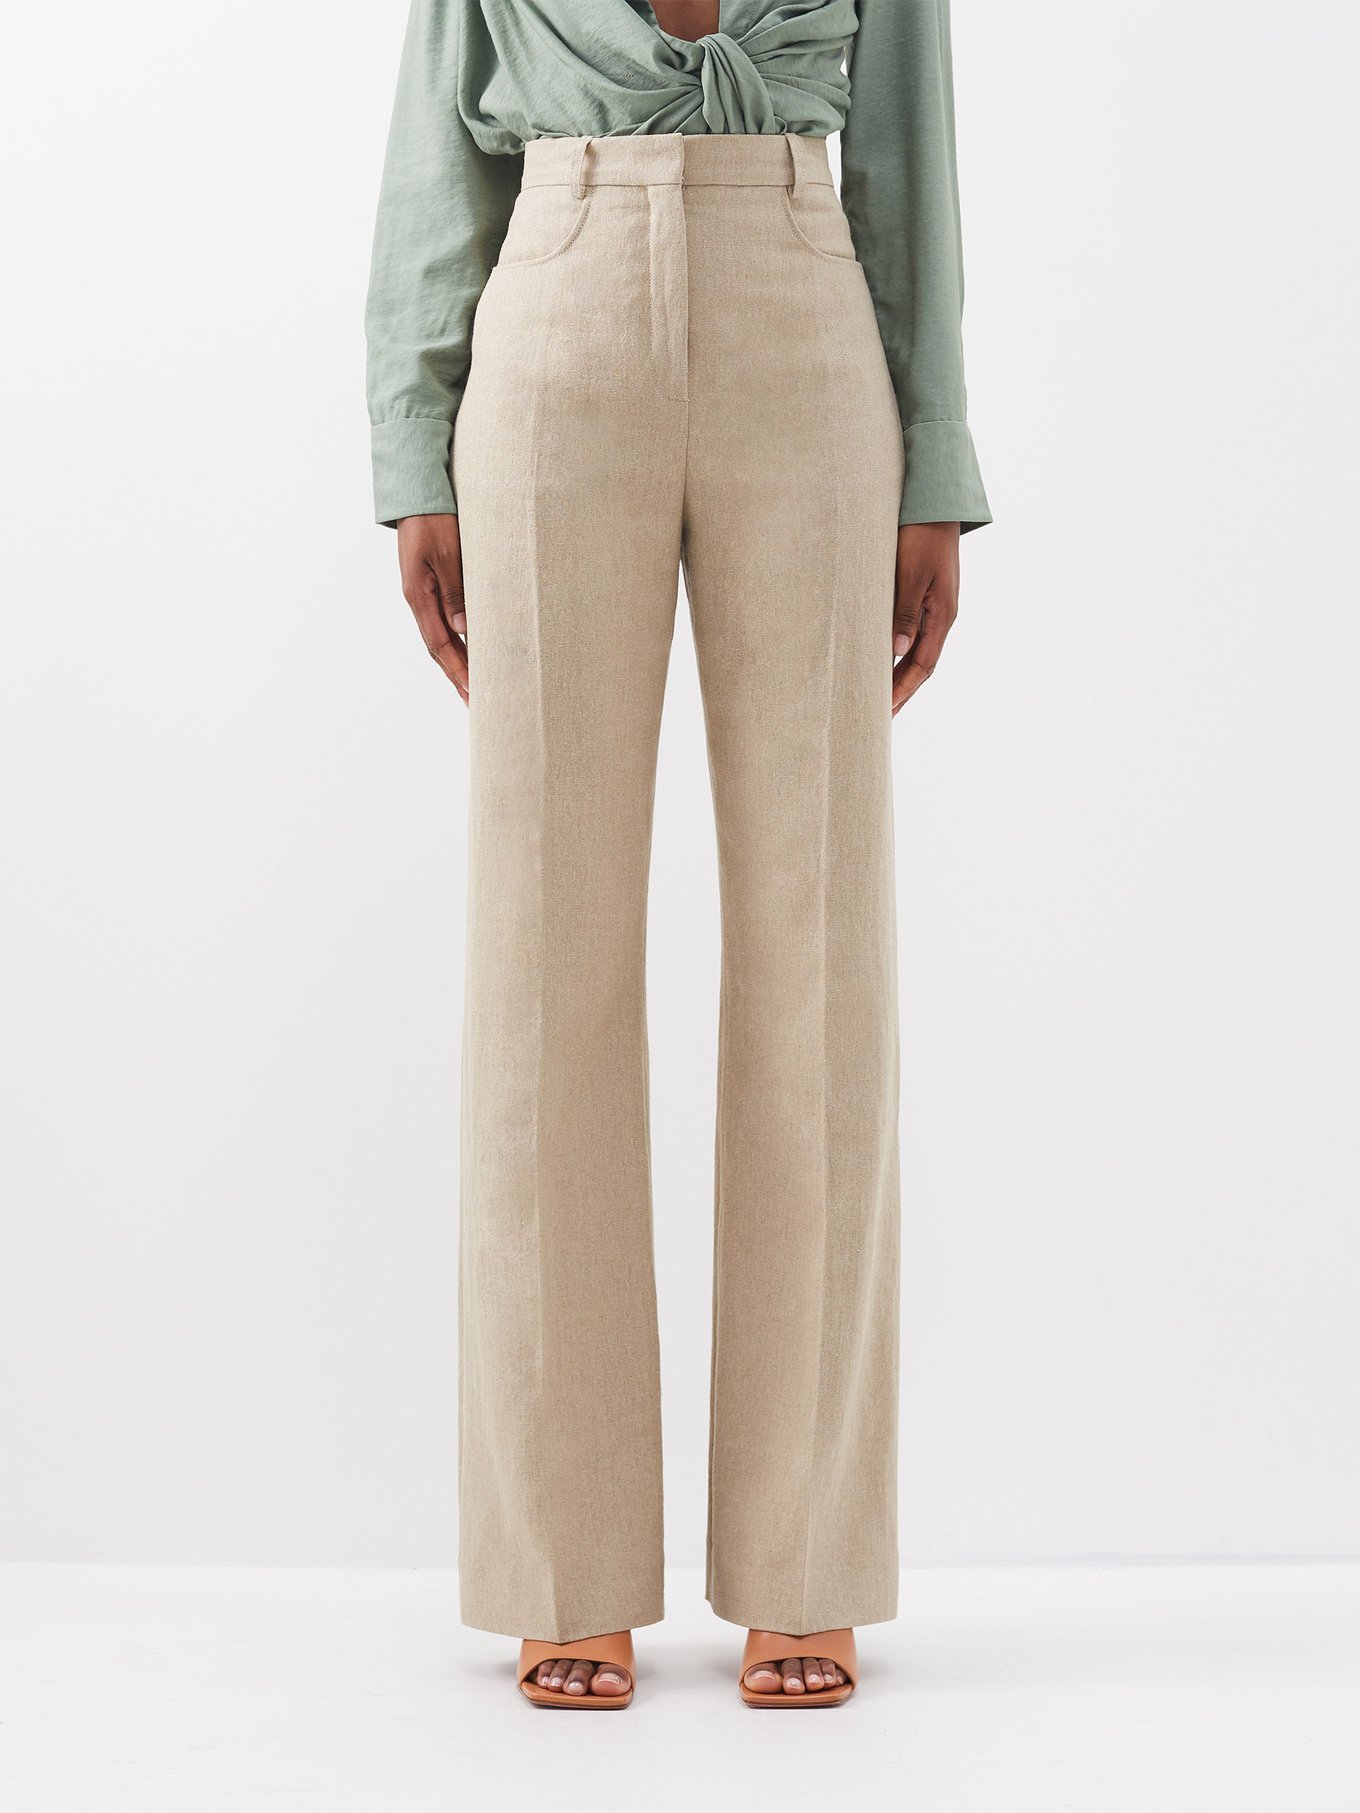 Jacquemus Sauge High-Waisted Trousers - Black